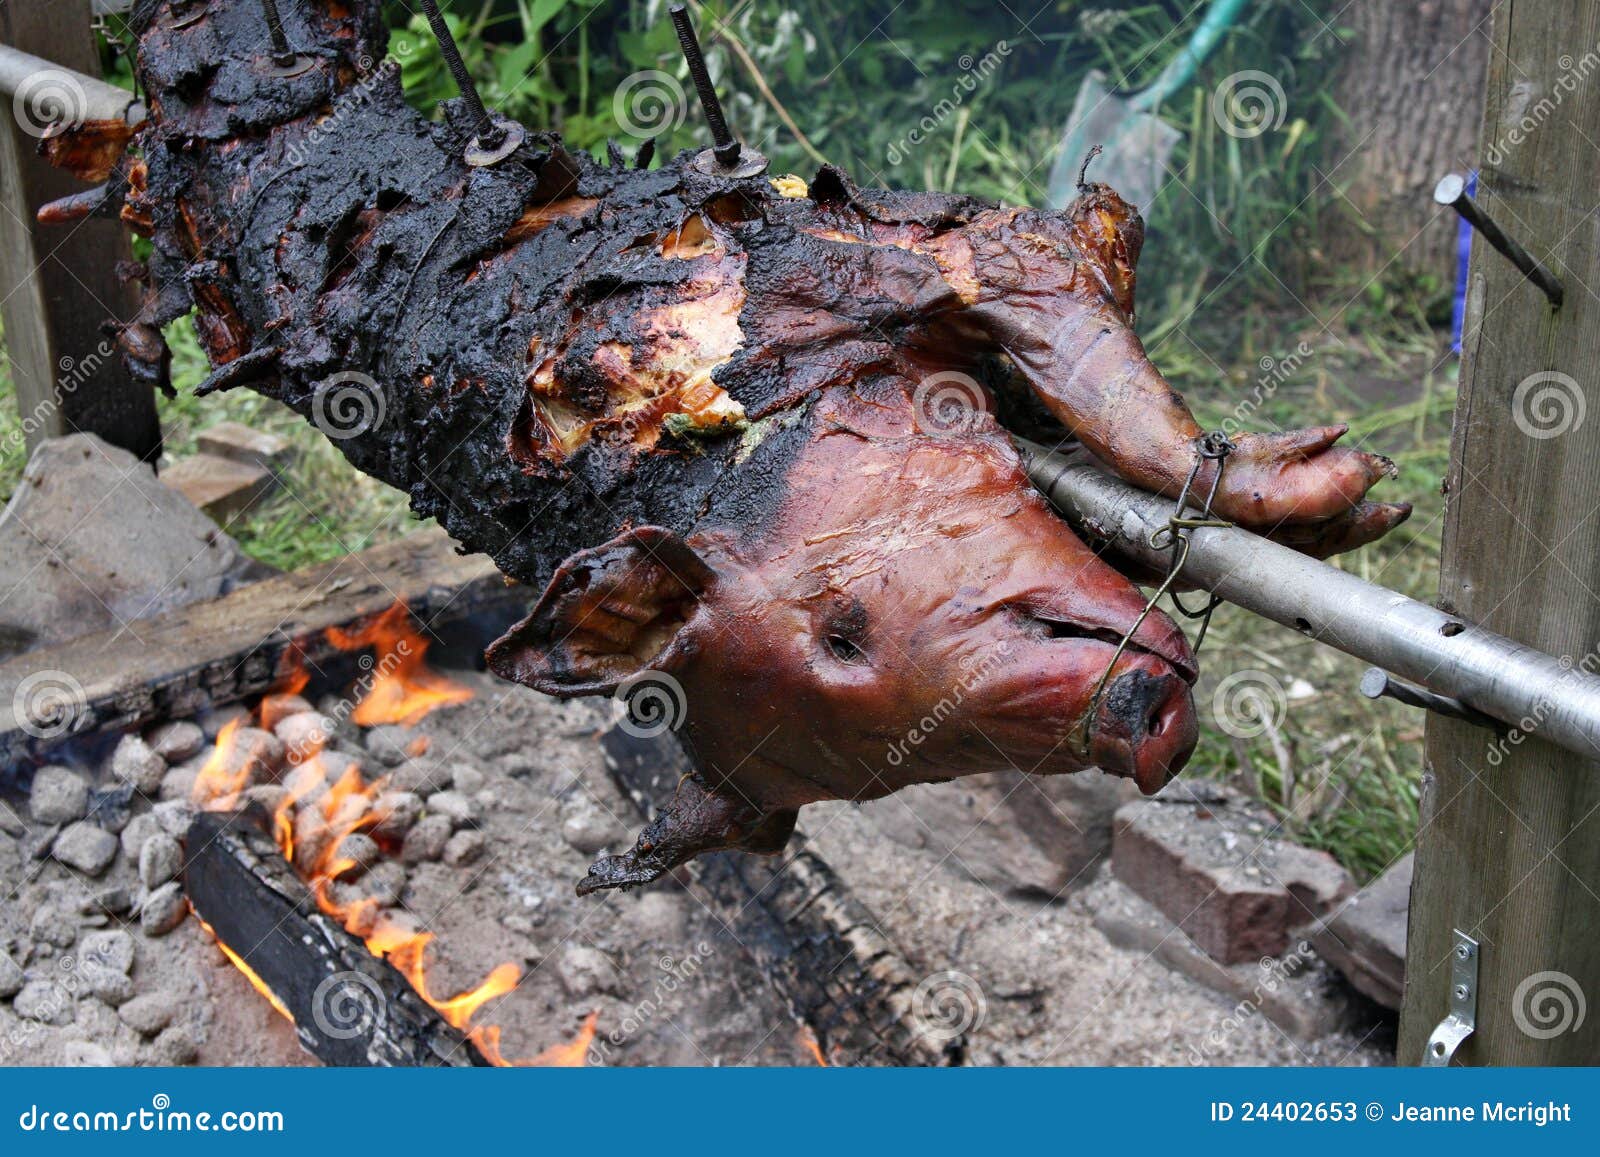 Whole Pig Roasting Over A Fire Stock Photos Image 24402653